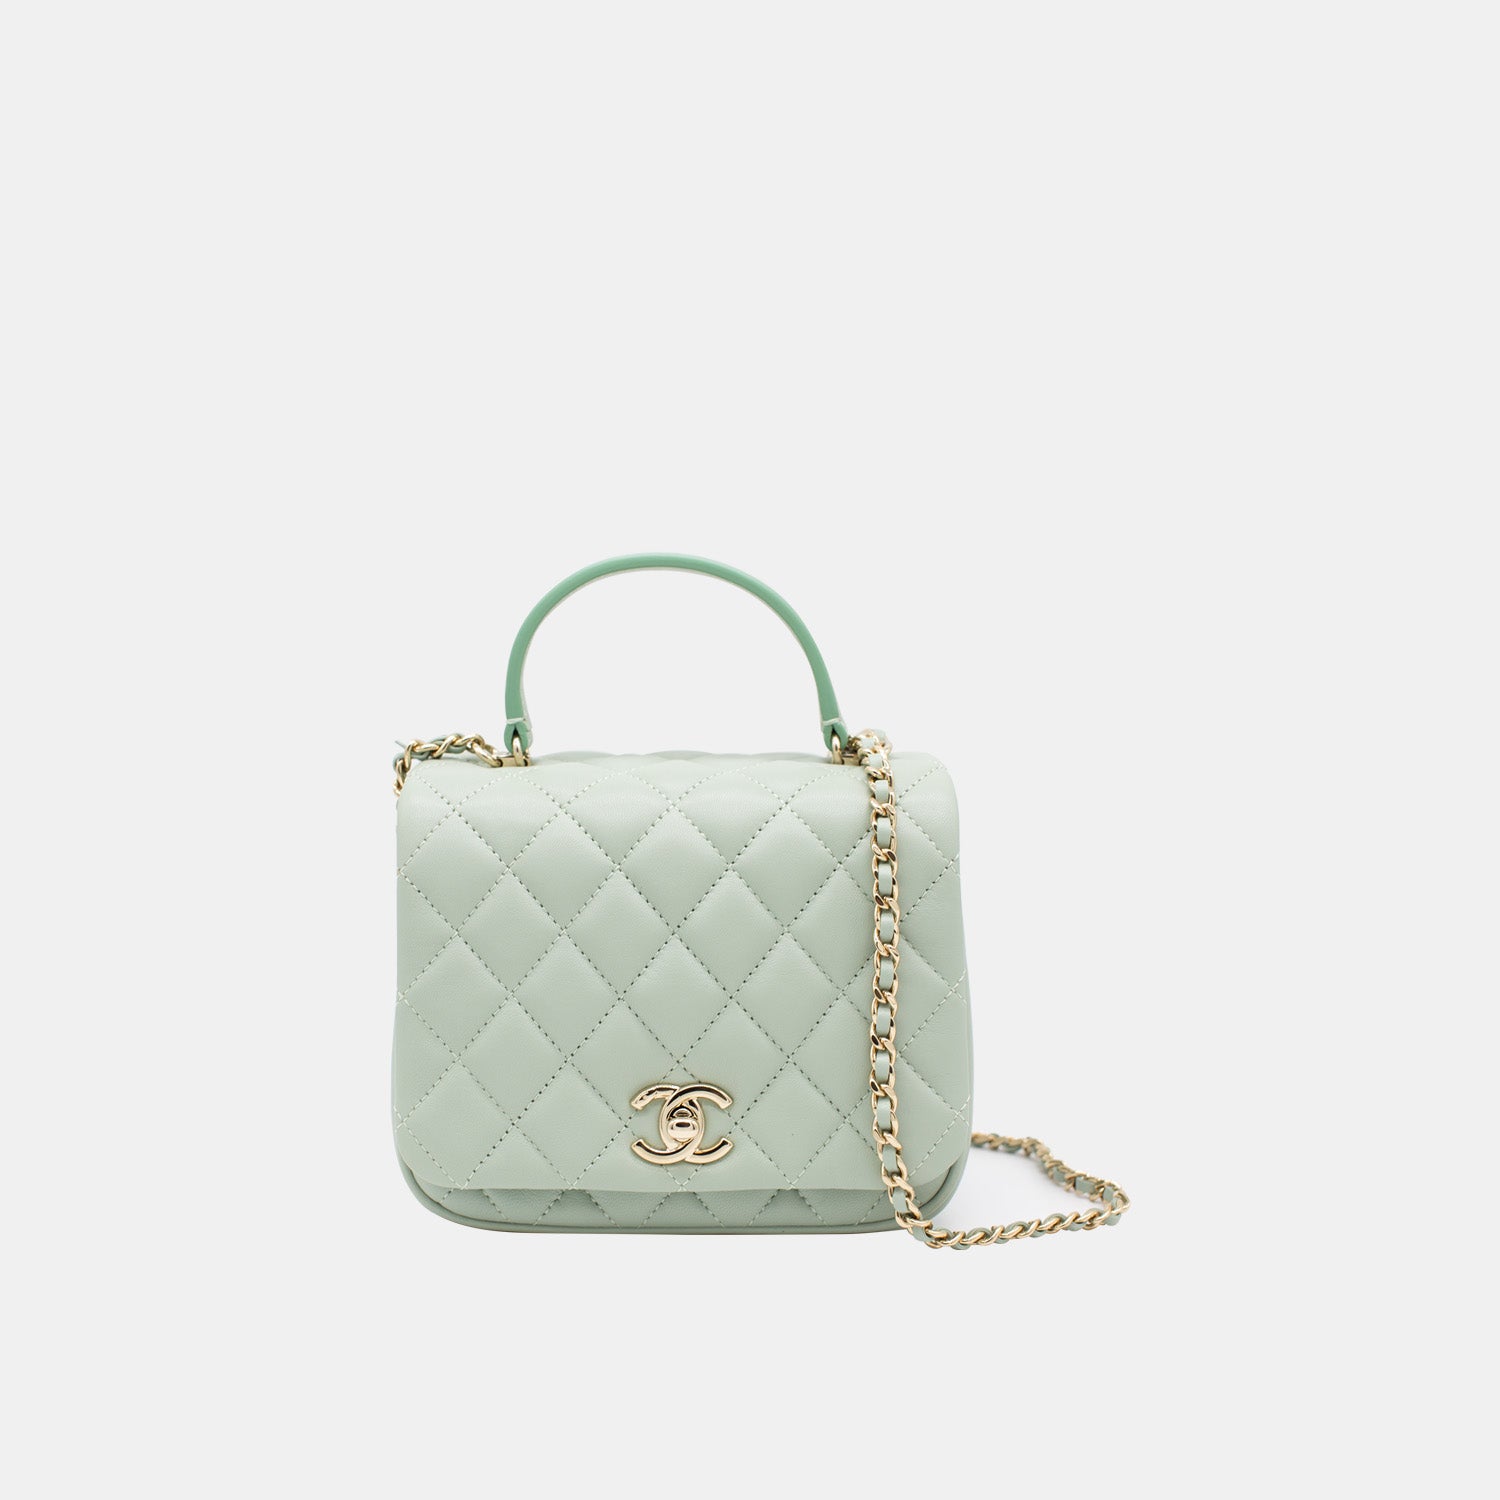 Green Chanel Flap - 91 For Sale on 1stDibs  chanel green classic flap, chanel  green mini flap bag, green chanel bag